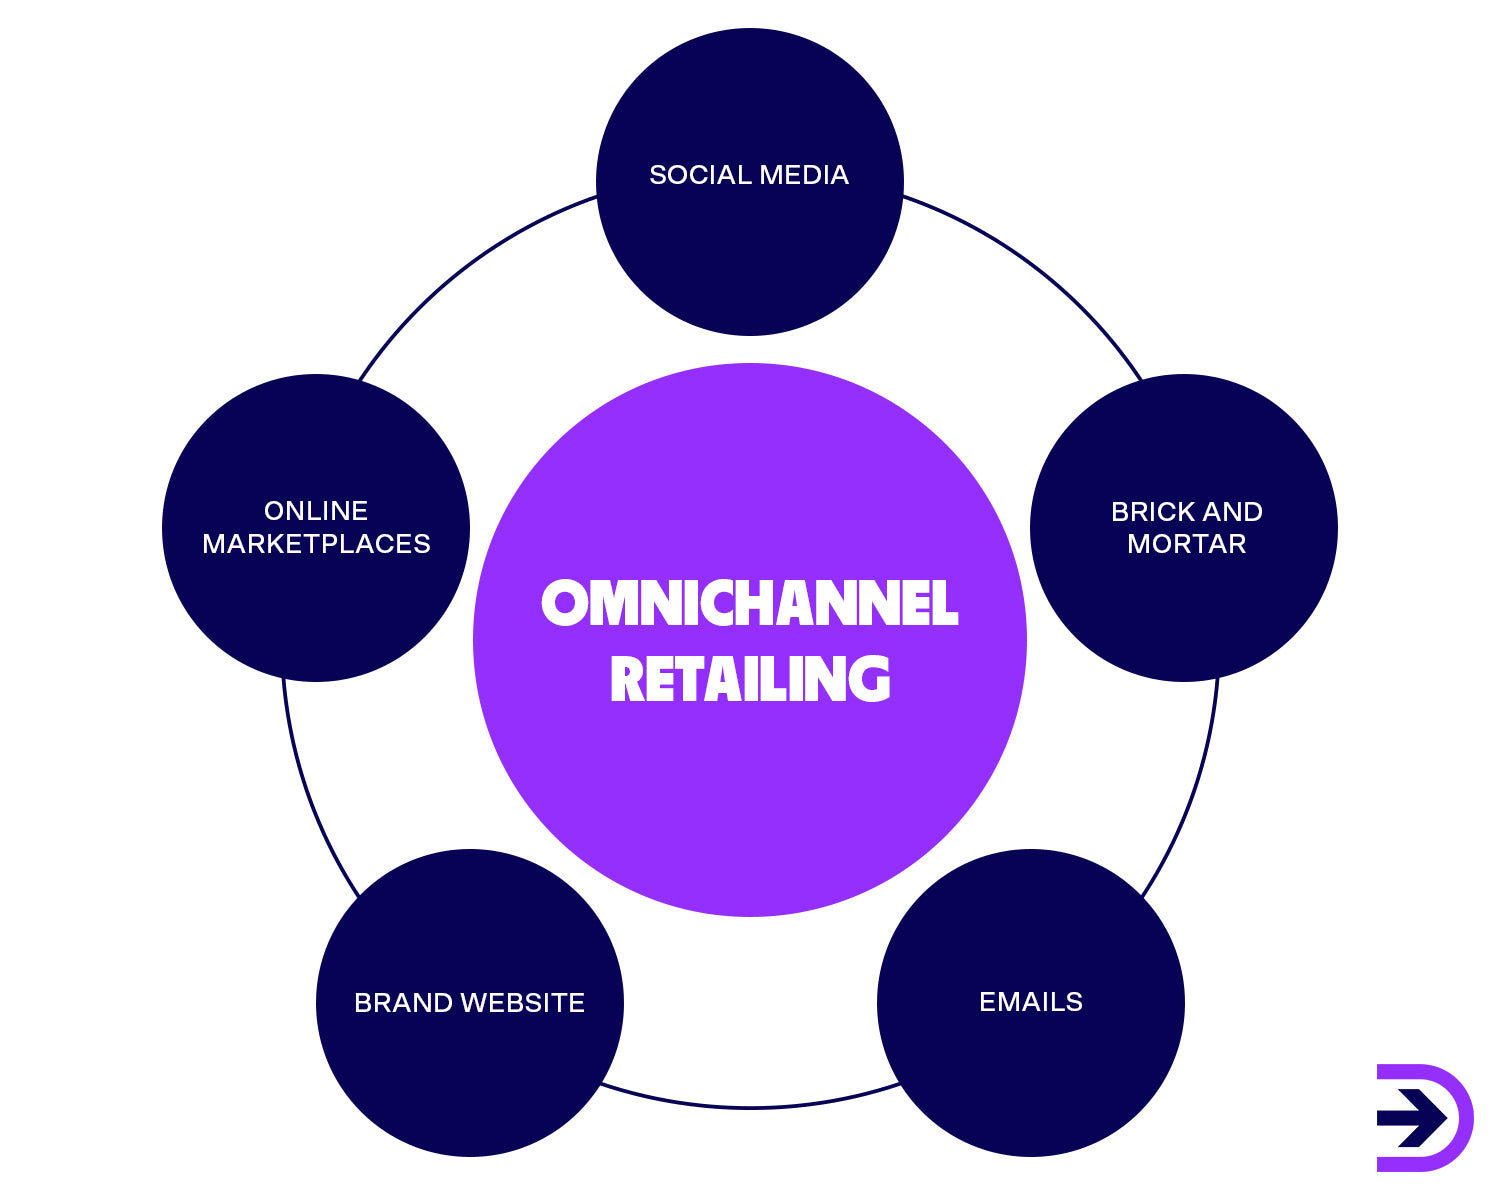 Omnichannel retailing involves a combination of channels such as social media, email marketing and website optimisation.